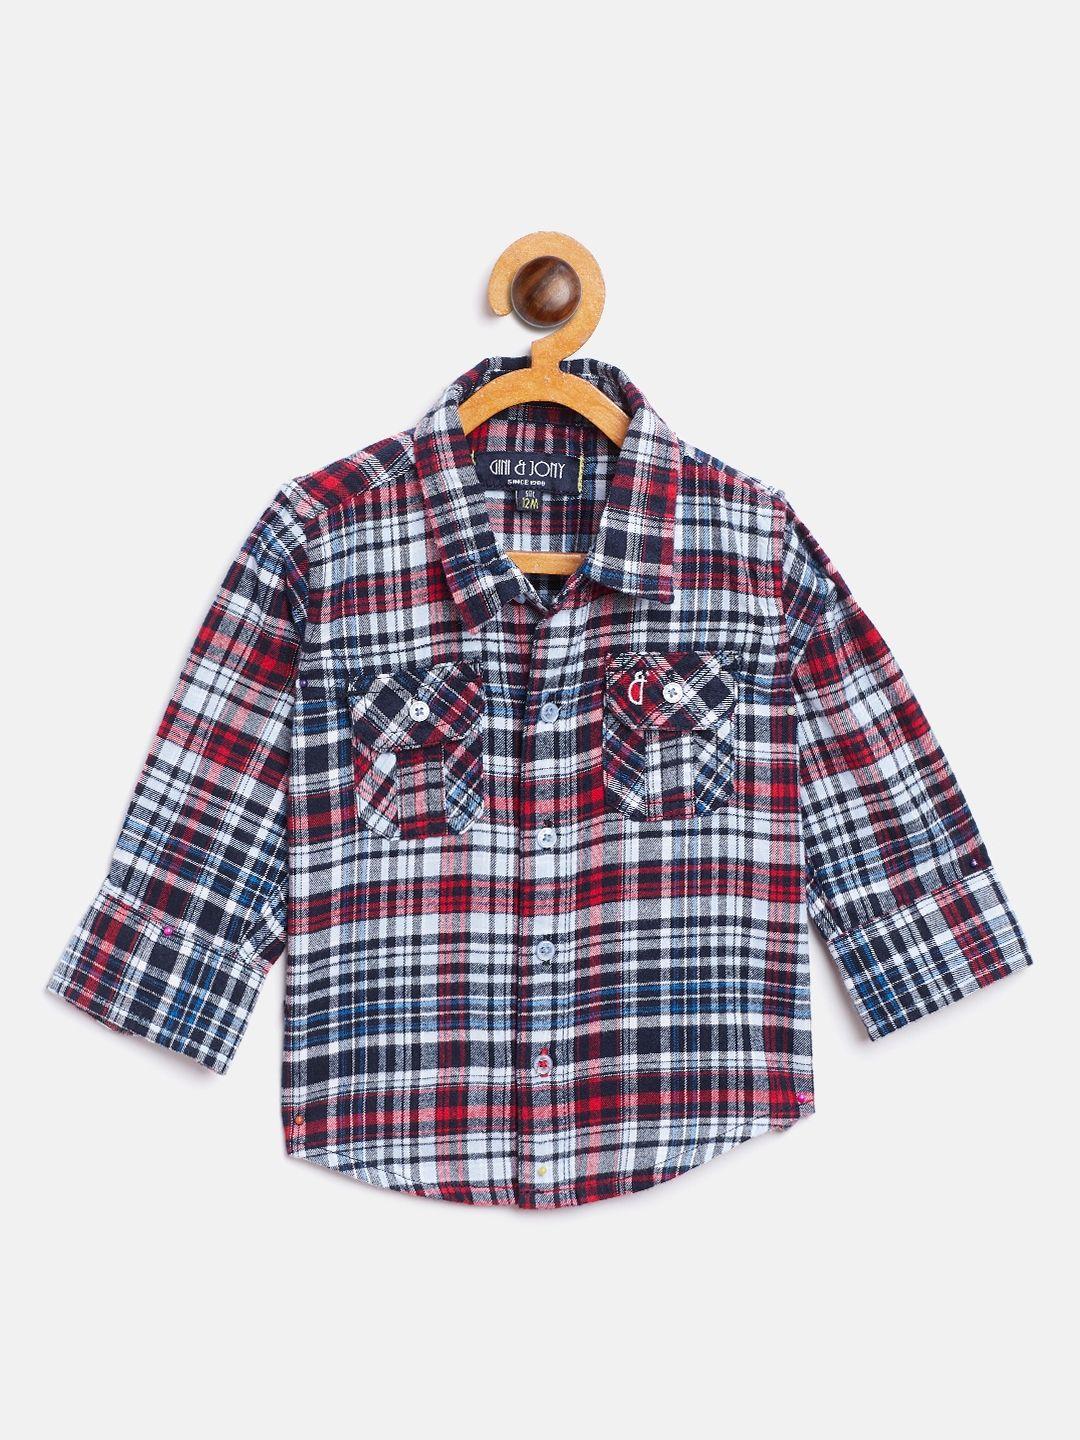 gini-and-jony-boys-blue-&-red-slim-fit-checked-casual-shirt